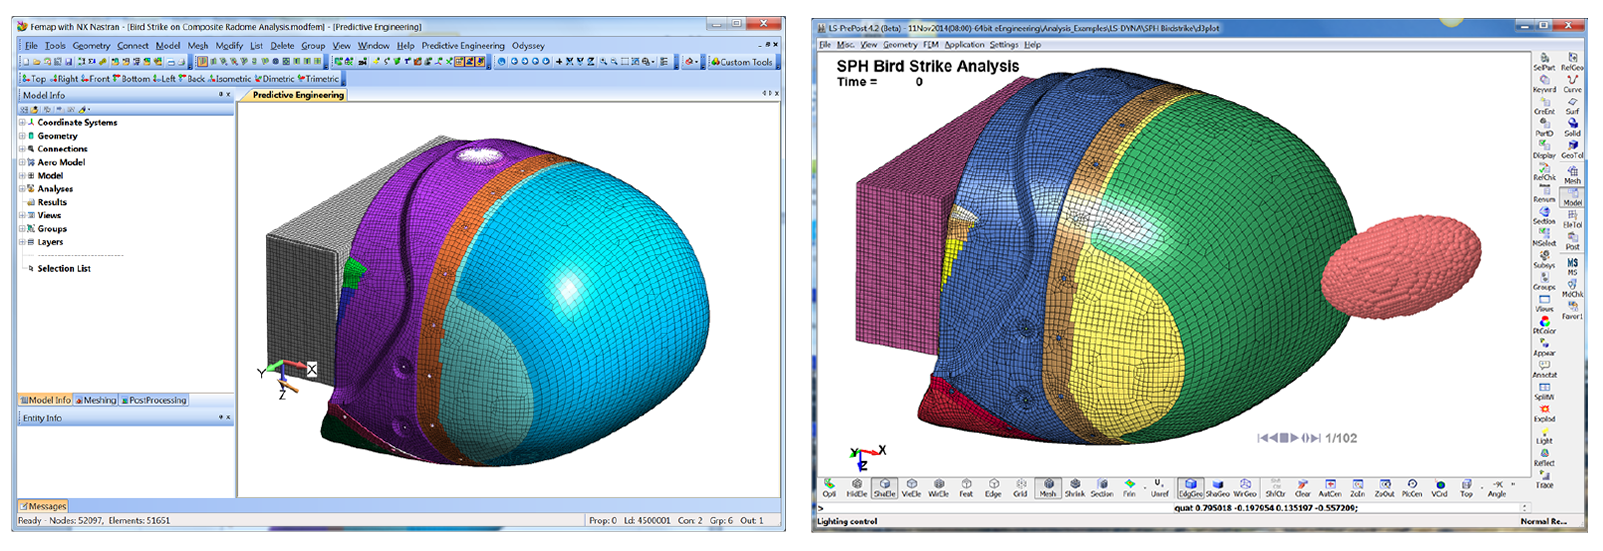 Femap model of composite radome structure translated out to LSTC’s LS-PrePost Interface with SPH bird added to the simulation